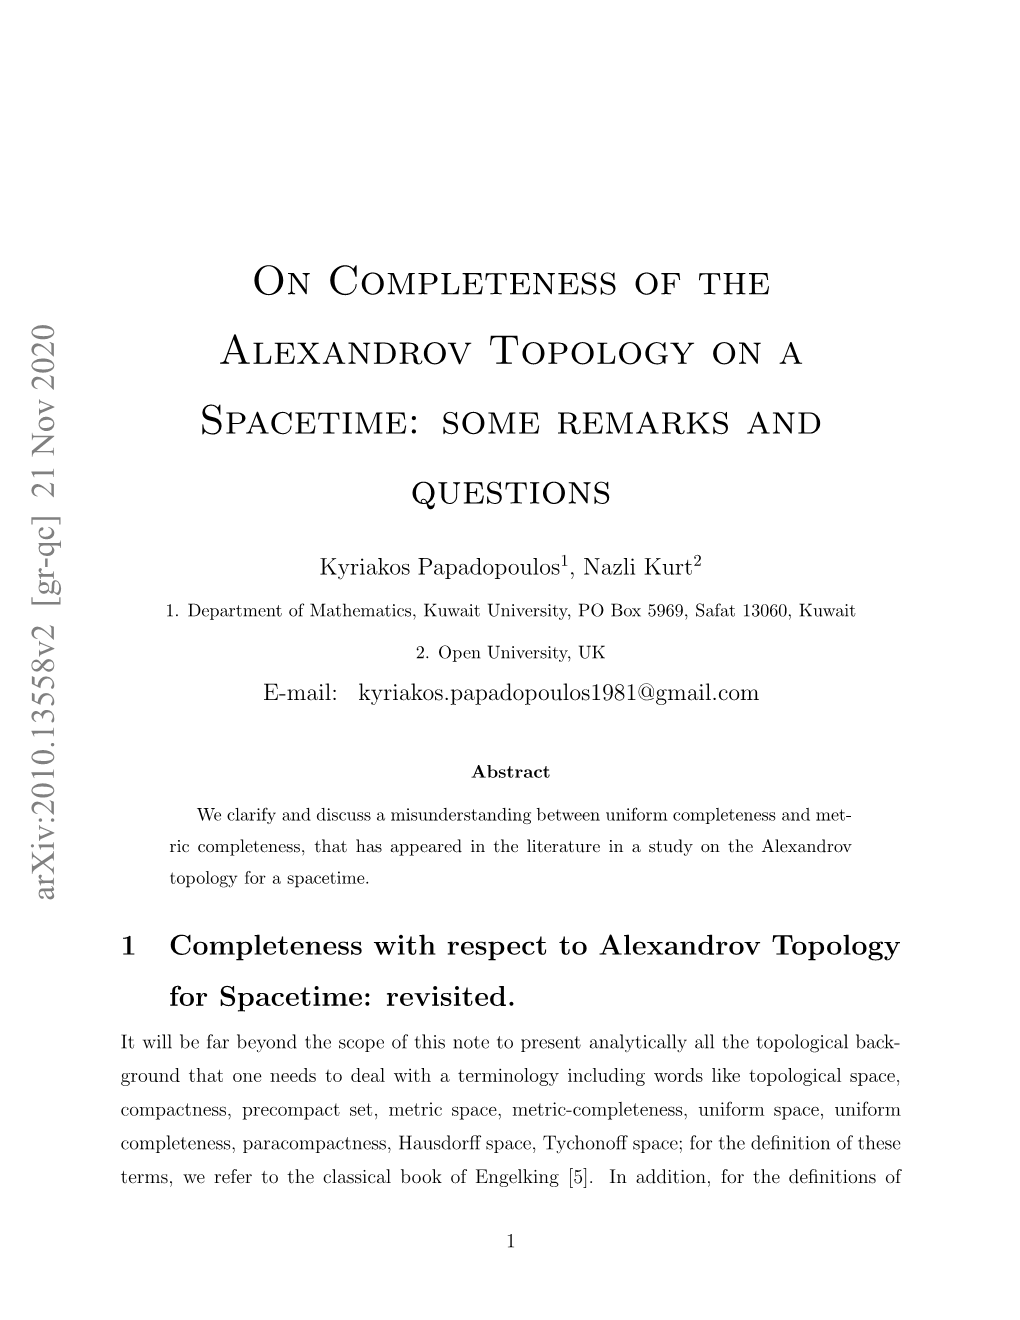 On Completeness of the Alexandrov Topology on a Spacetime: Some Remarks and Questions